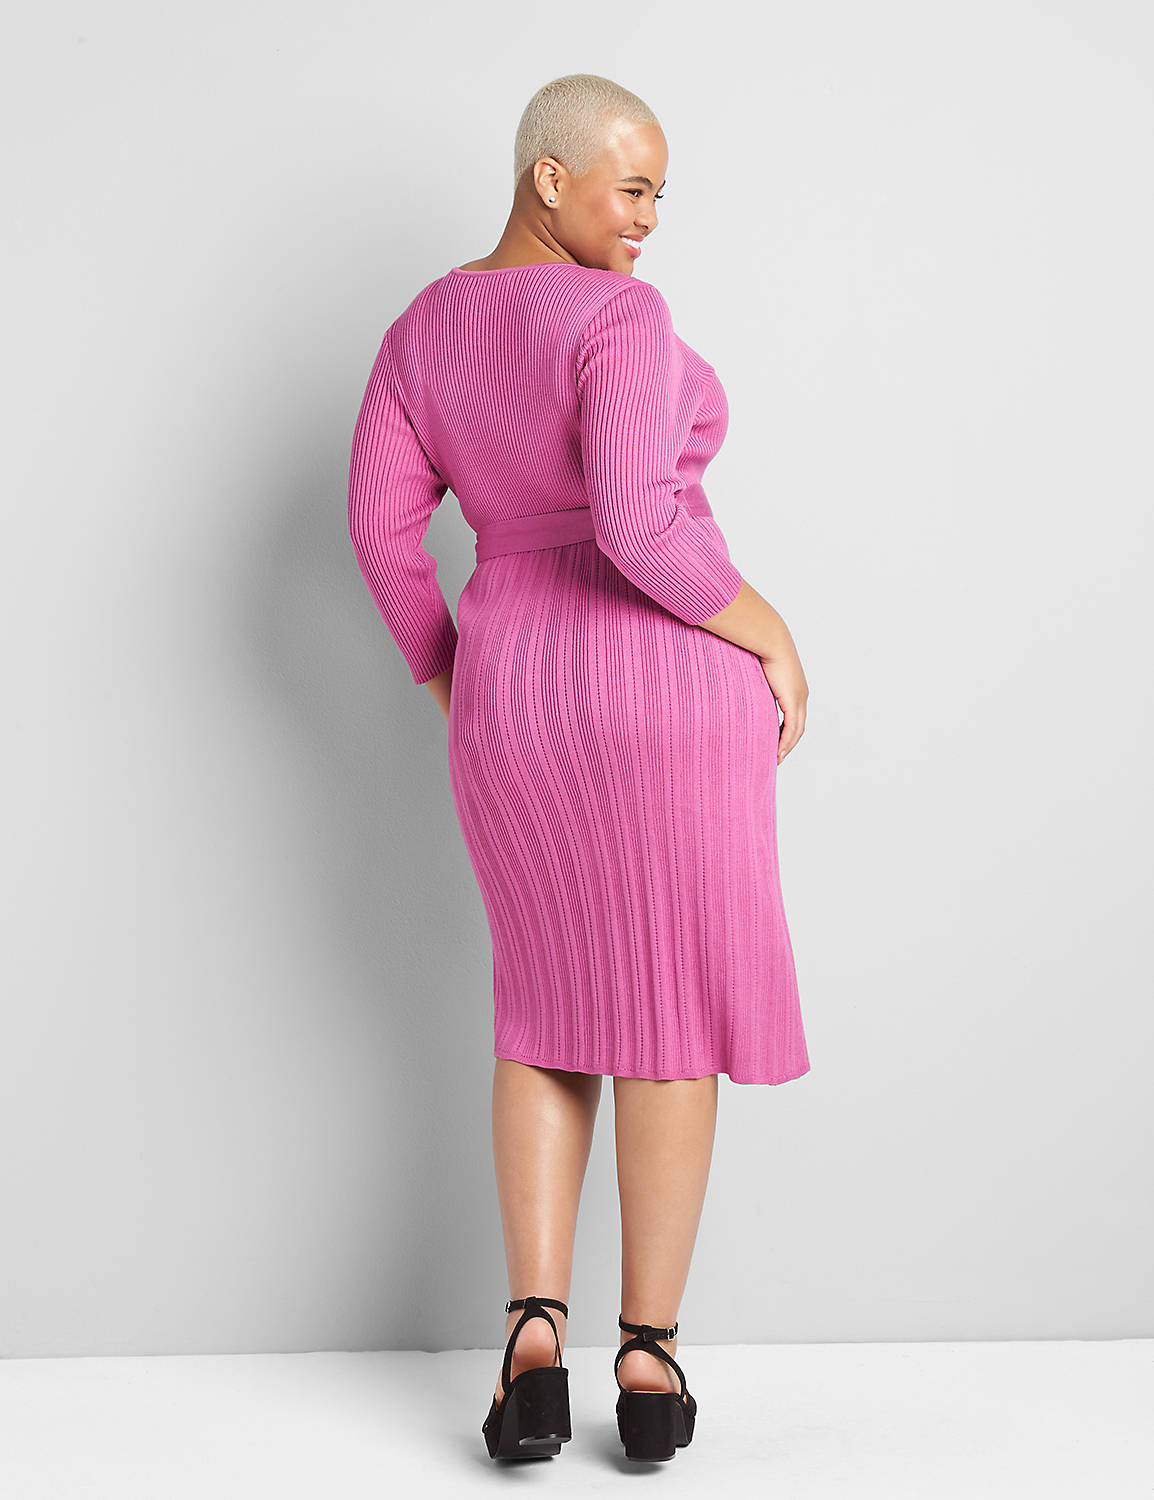 Ribbed Mix Sweater Dress Product Image 2